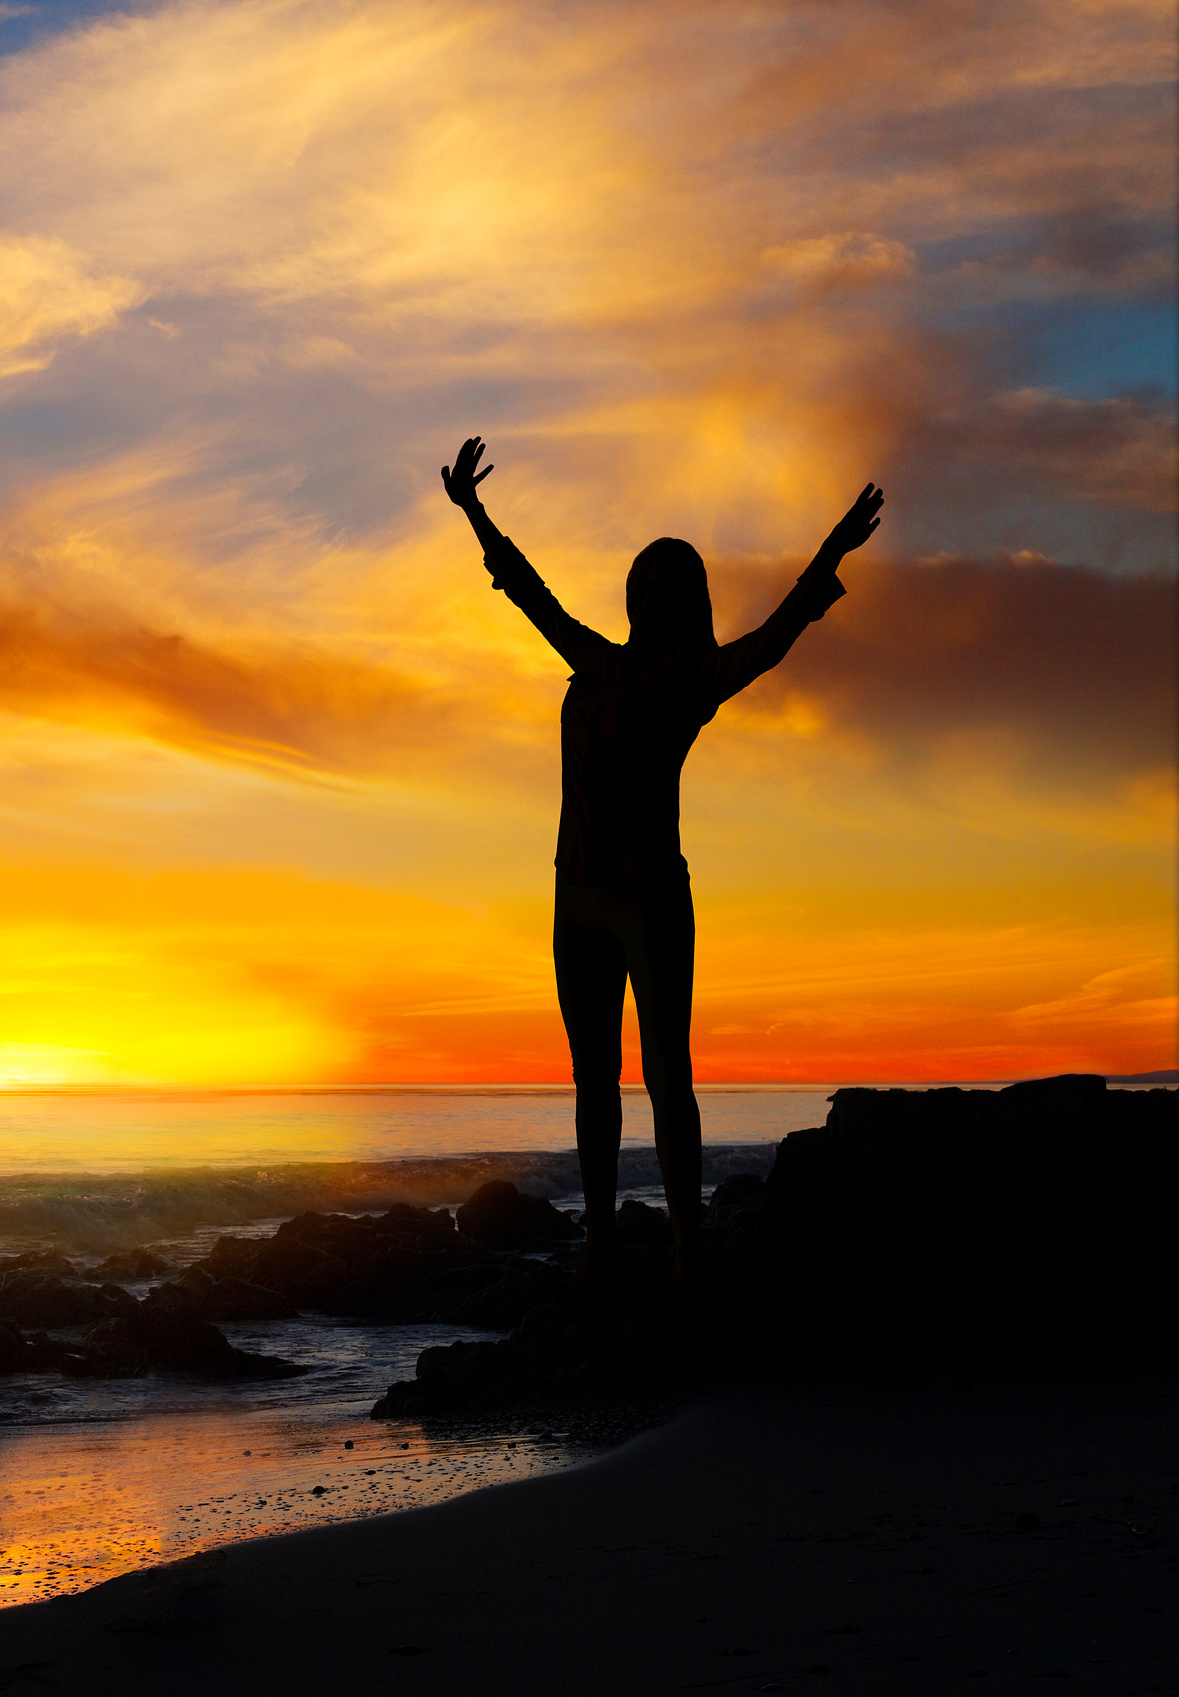 Empowered woman. Woman standing with arms raised near ocean in sunset